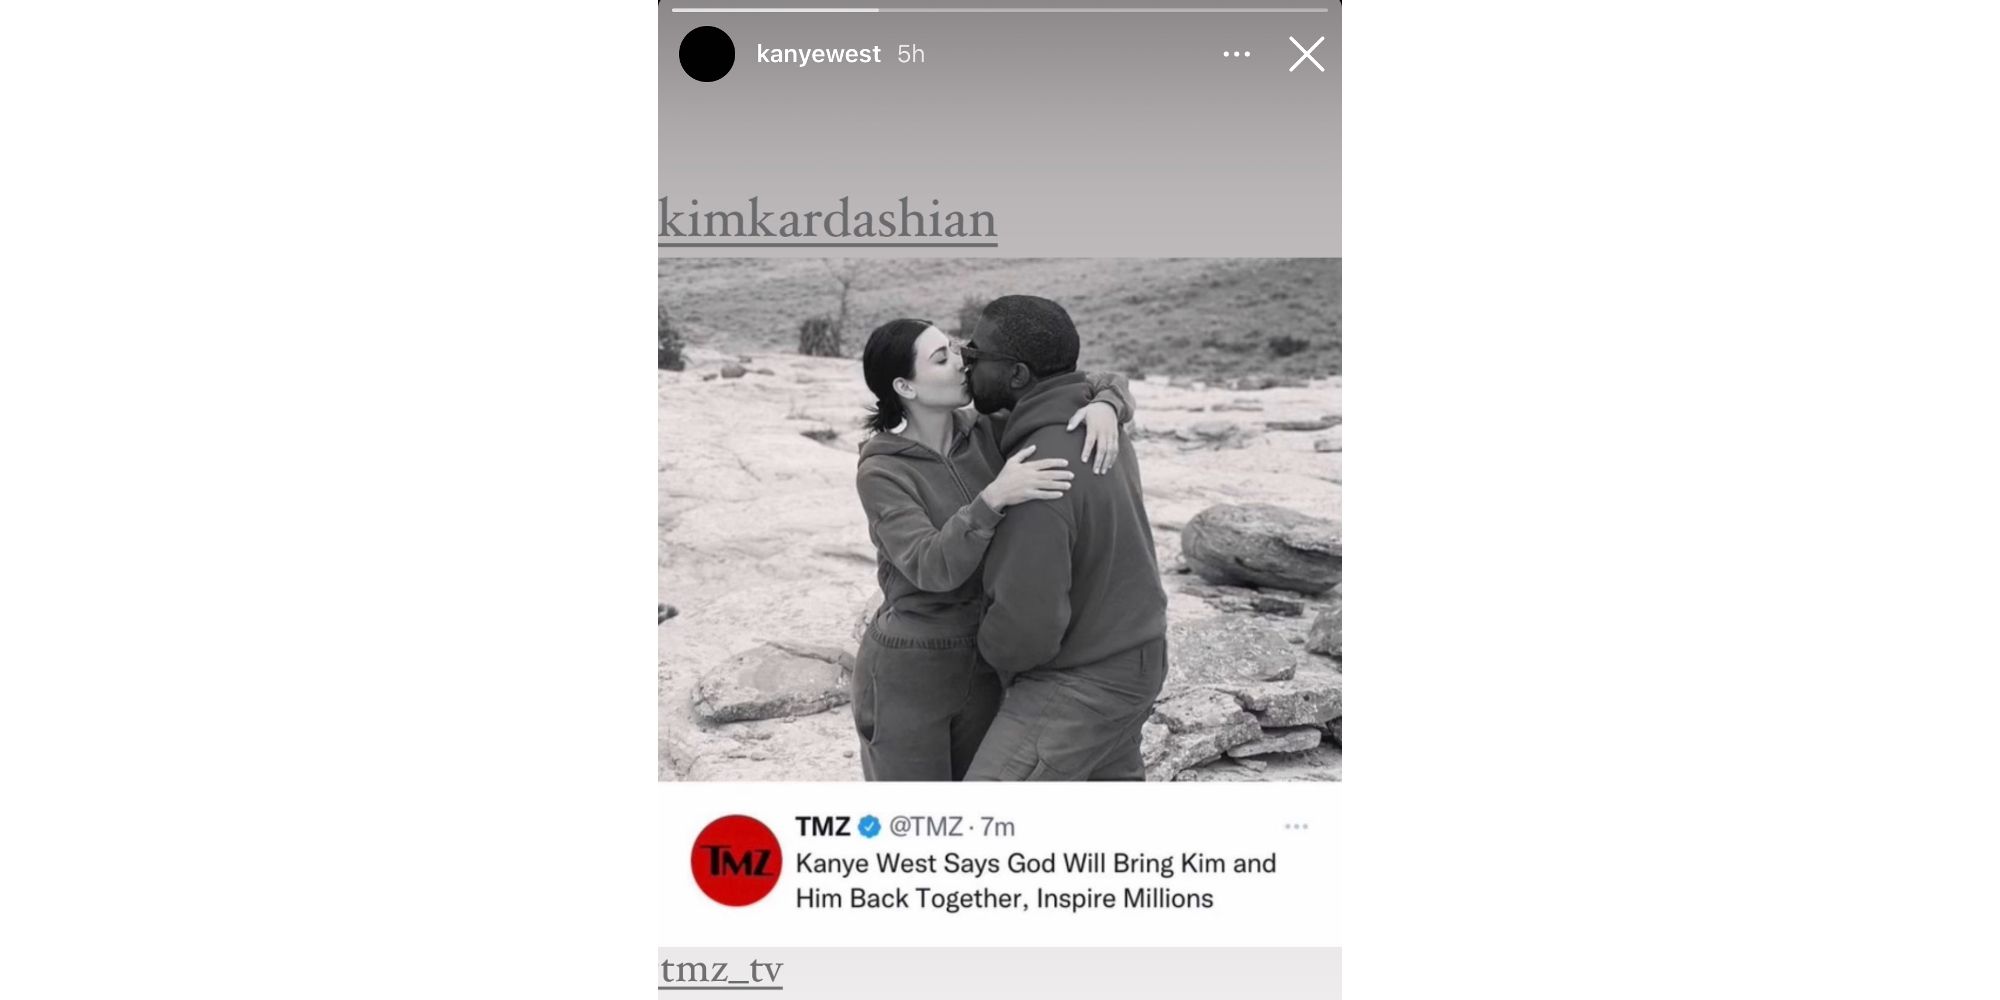 Kim Kardashian and Kanye West from Keeping Up With The Kardashians via Instagram Story sharing TMZ story about their reconciliation